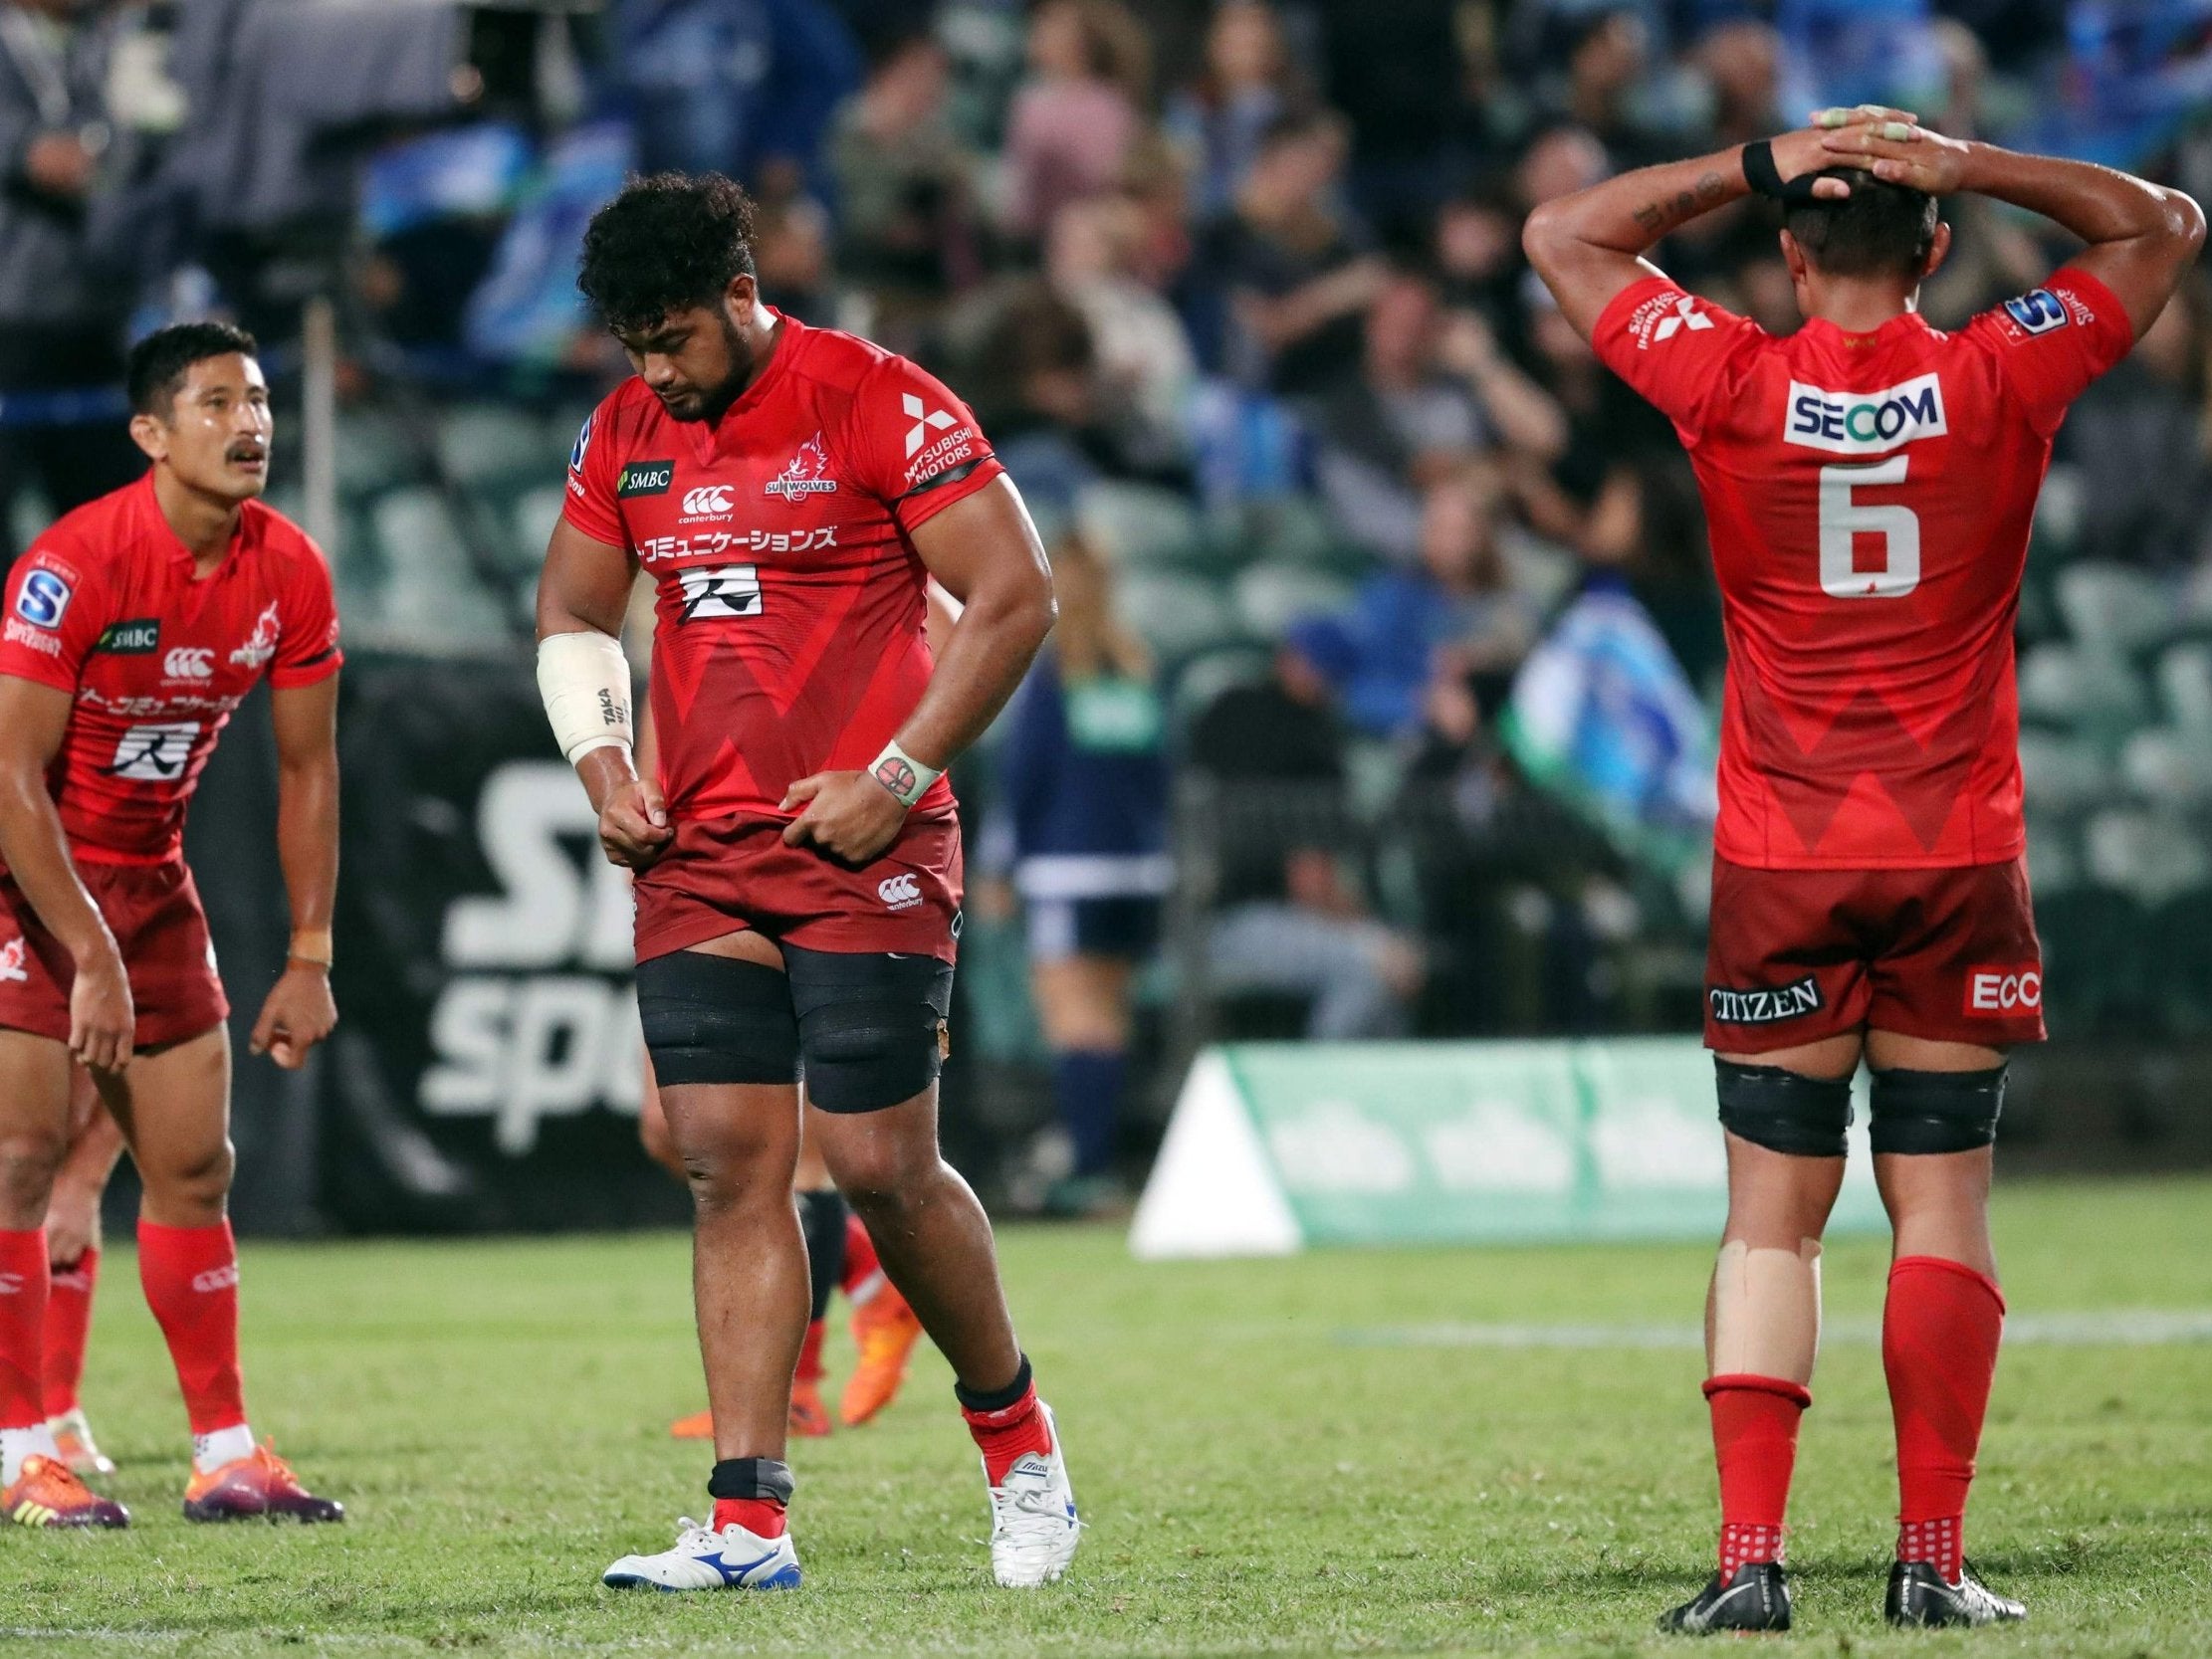 Japanese sides Sunwolves will be axed from Super Rugby from 2021